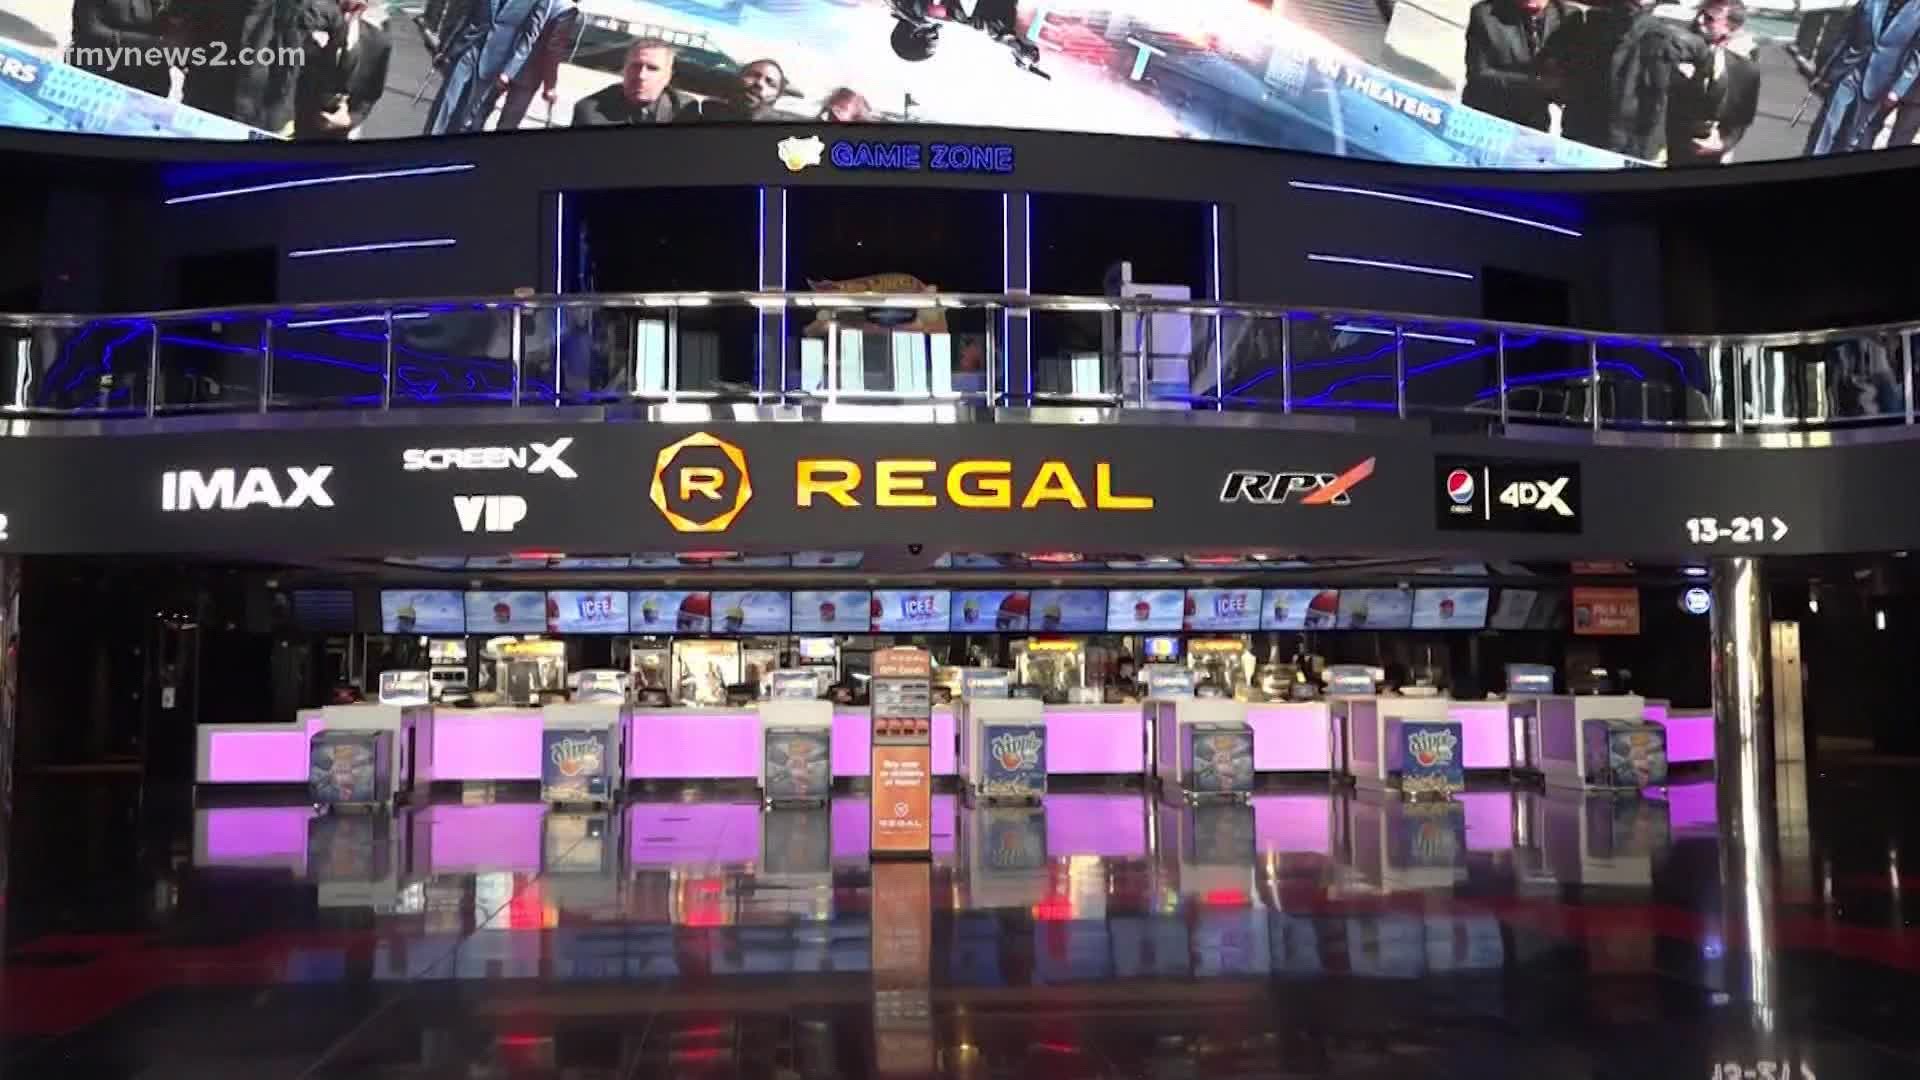 Regal Cinemas is once again closing its doors to try to stay afloat during the coronavirus pandemic.